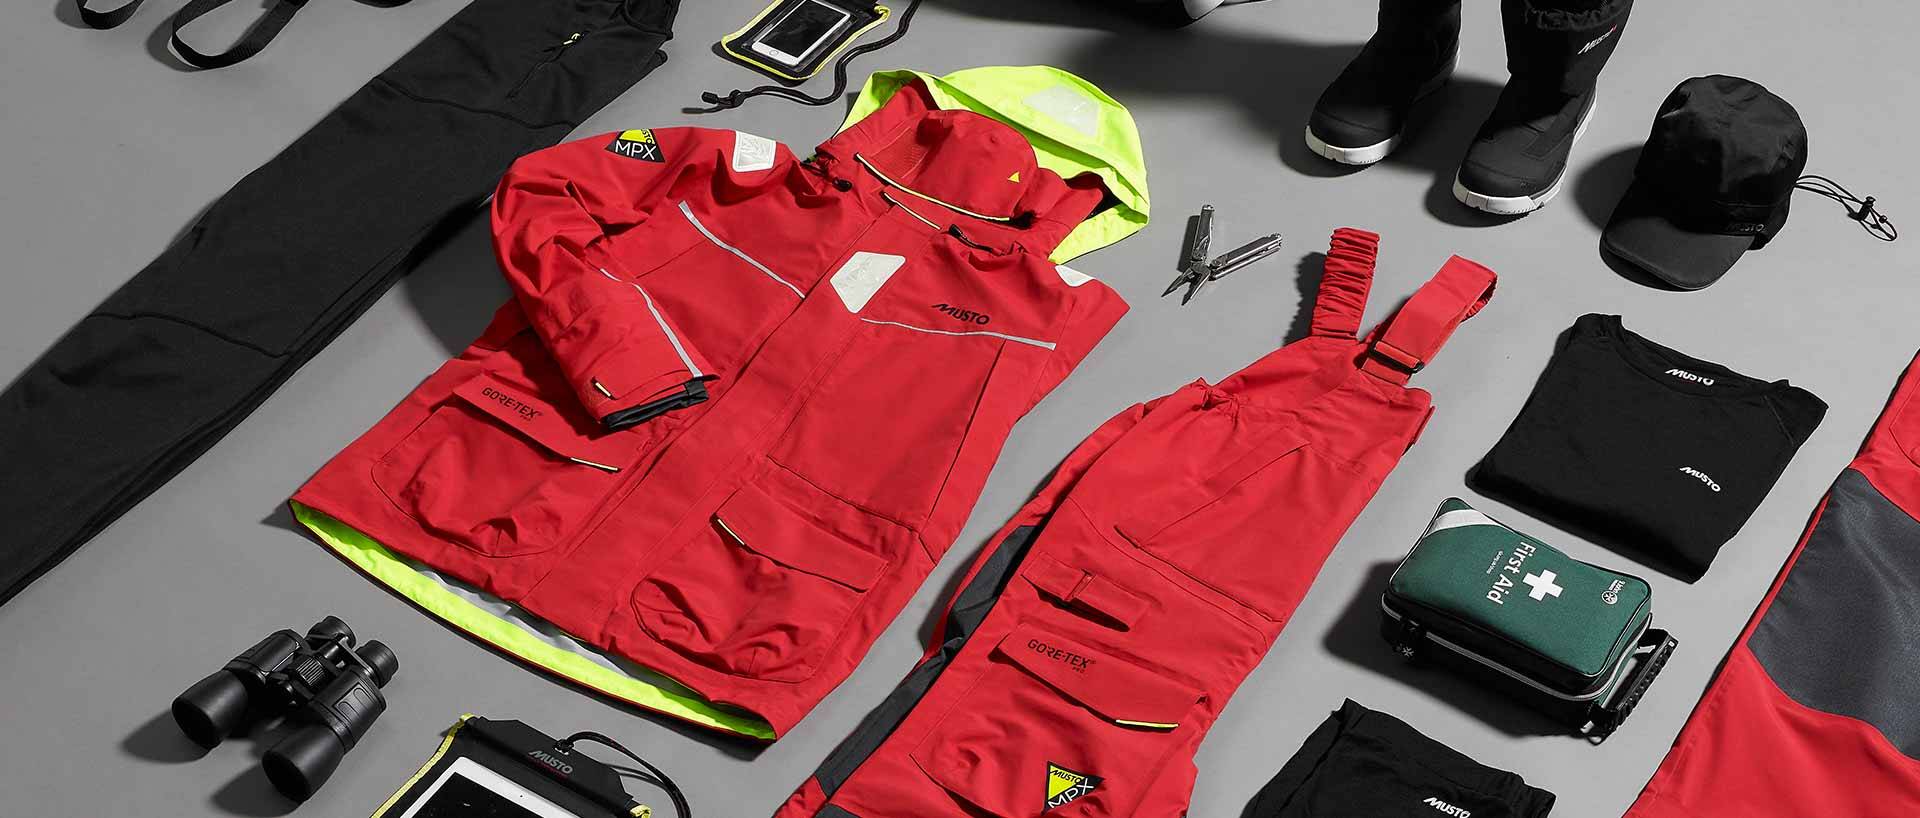 What to wear for sailing? Photo by @@Musto